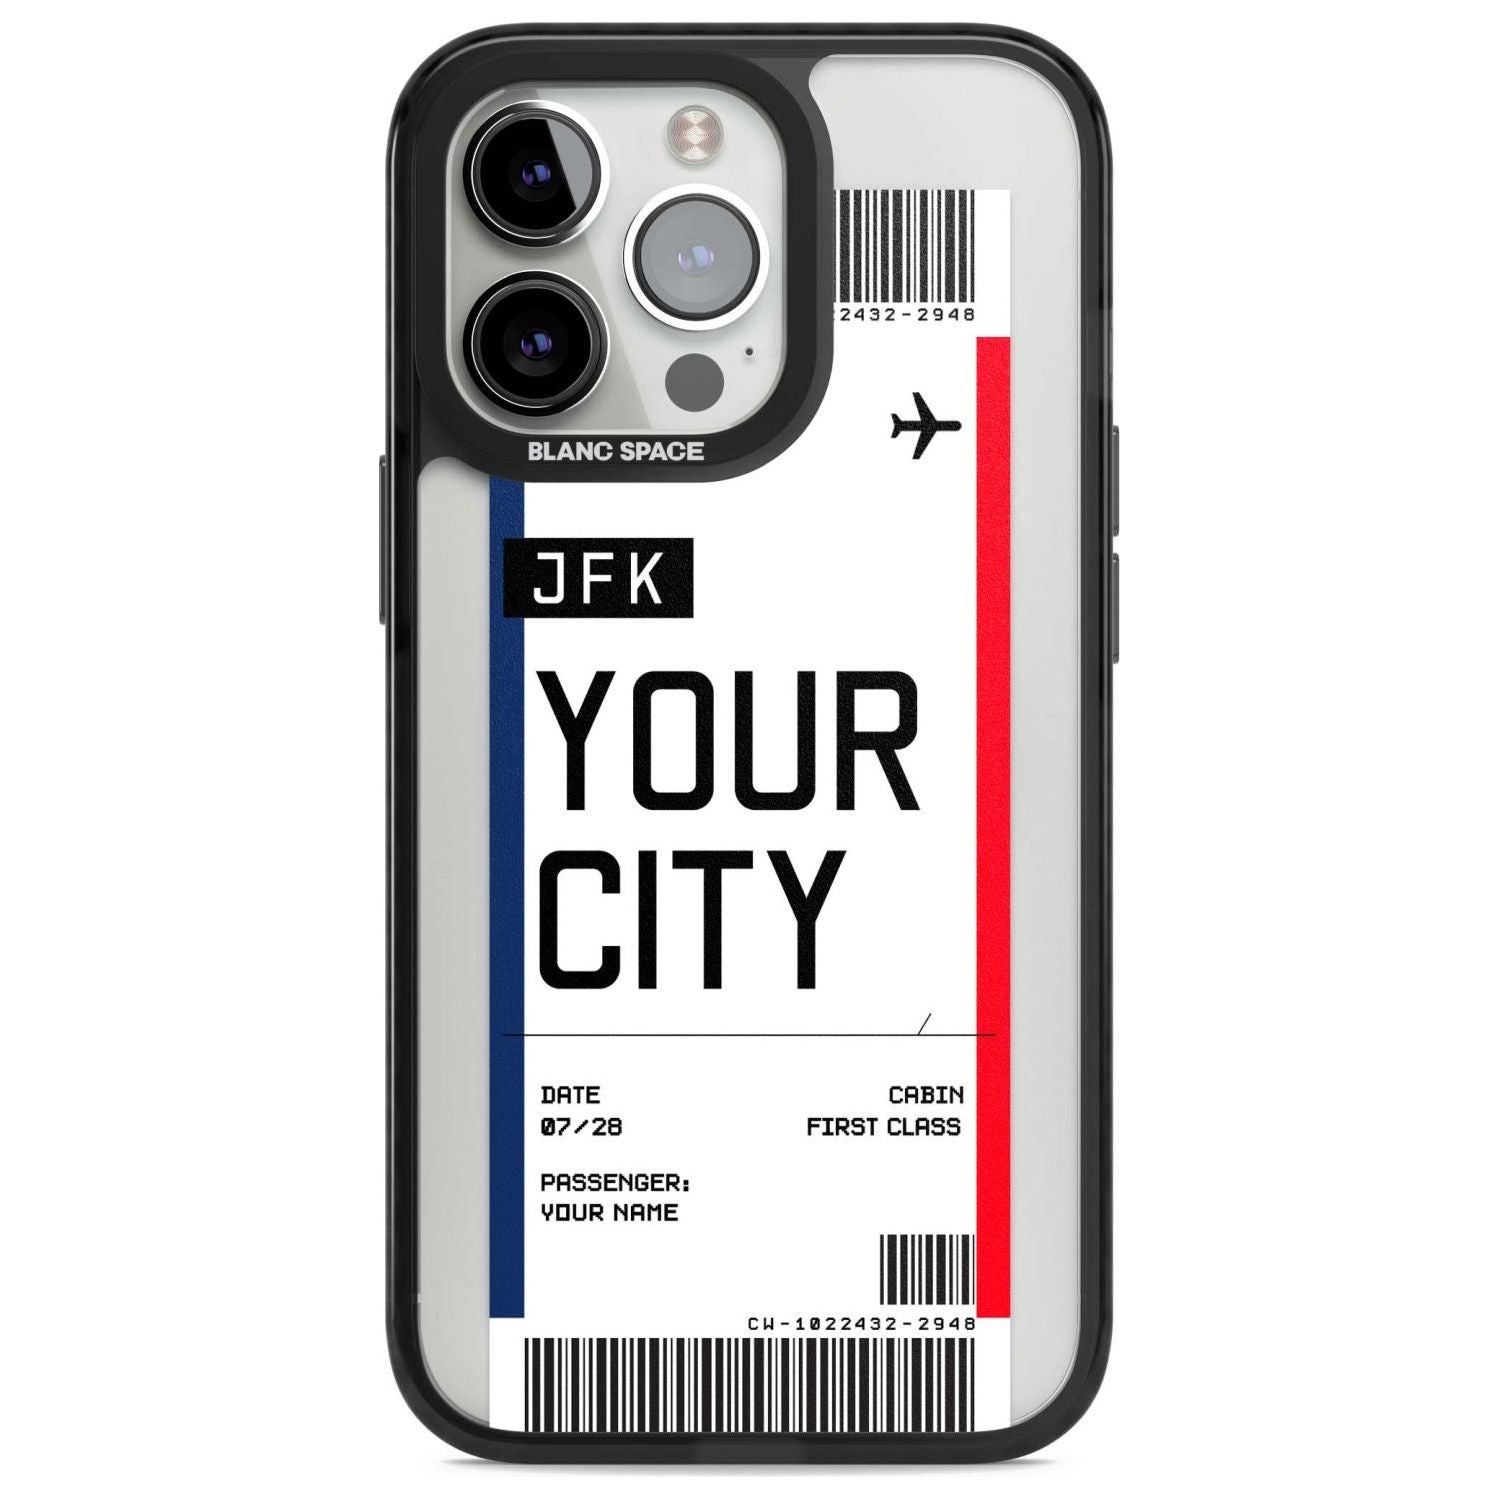 Personalised Create Your Own Boarding Pass Ticket Custom Phone Case iPhone 15 Pro Max / Magsafe Black Impact Case,iPhone 15 Pro / Magsafe Black Impact Case,iPhone 14 Pro Max / Magsafe Black Impact Case,iPhone 14 Pro / Magsafe Black Impact Case,iPhone 13 Pro / Magsafe Black Impact Case Blanc Space